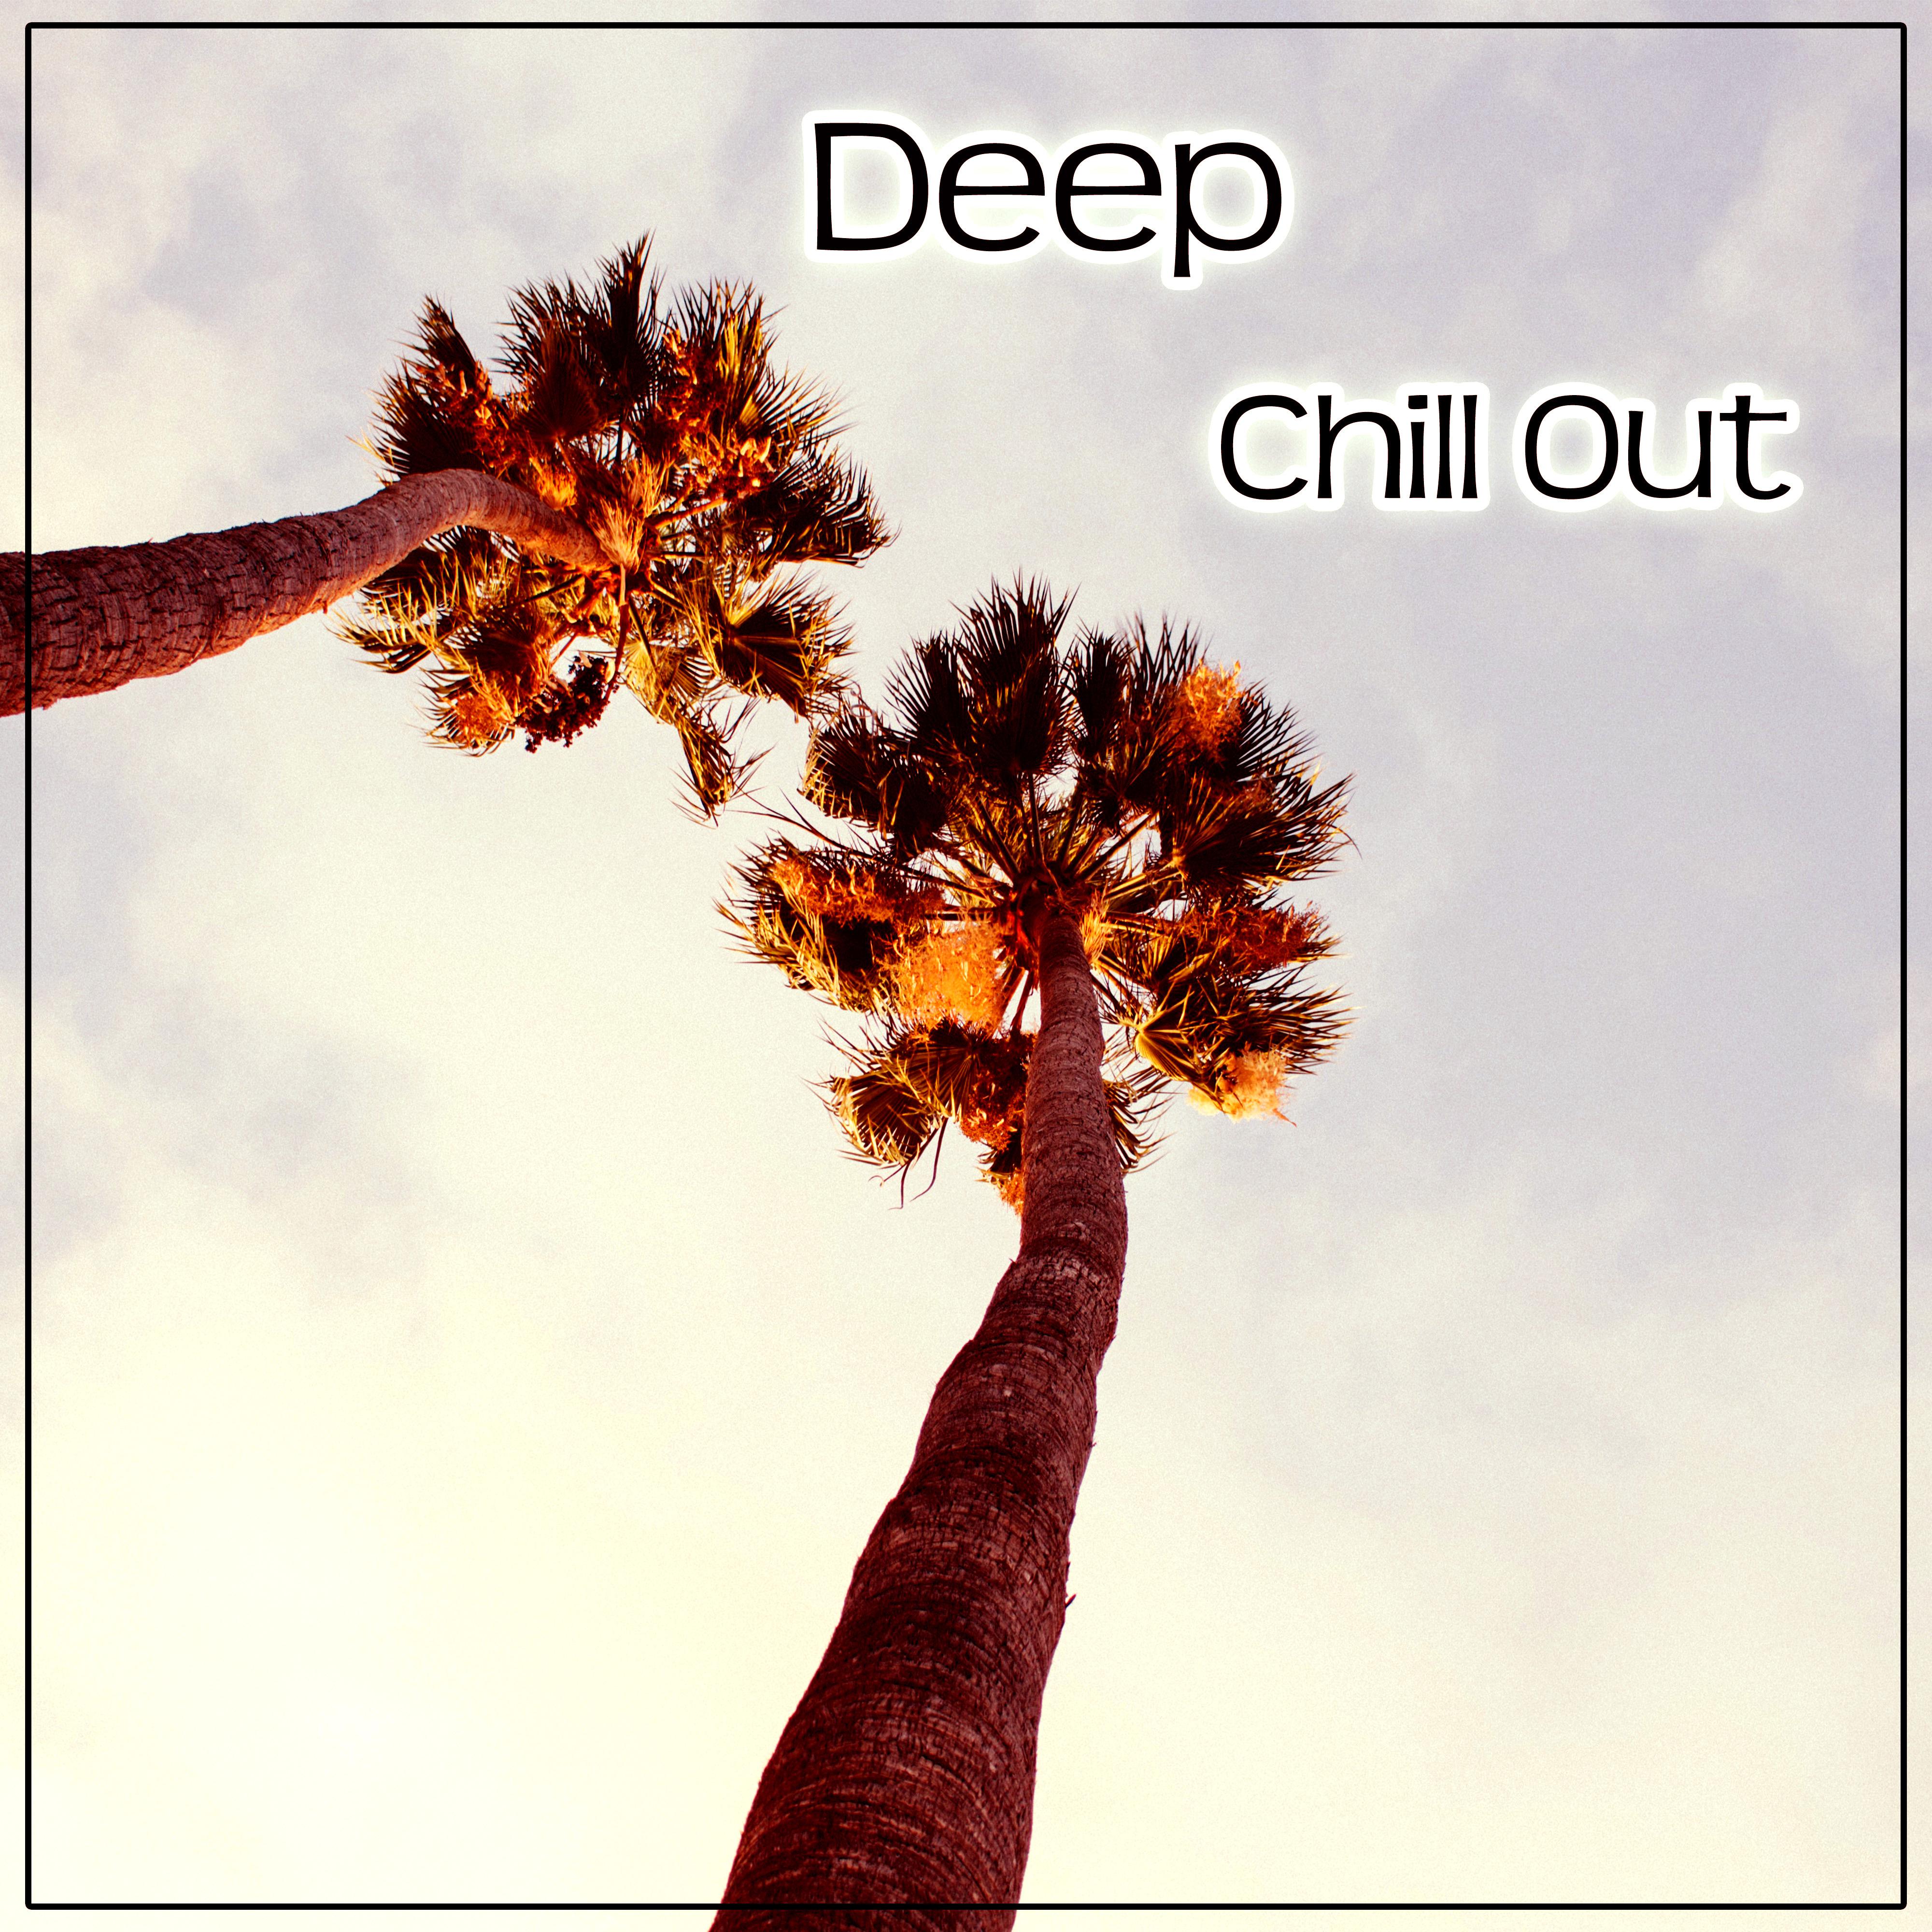 Deep Chill Out – Ambient Chill Out Music, Deep Lounge, Beach Party, Chilling, Summer Time, Dance Party, Ibiza Beach